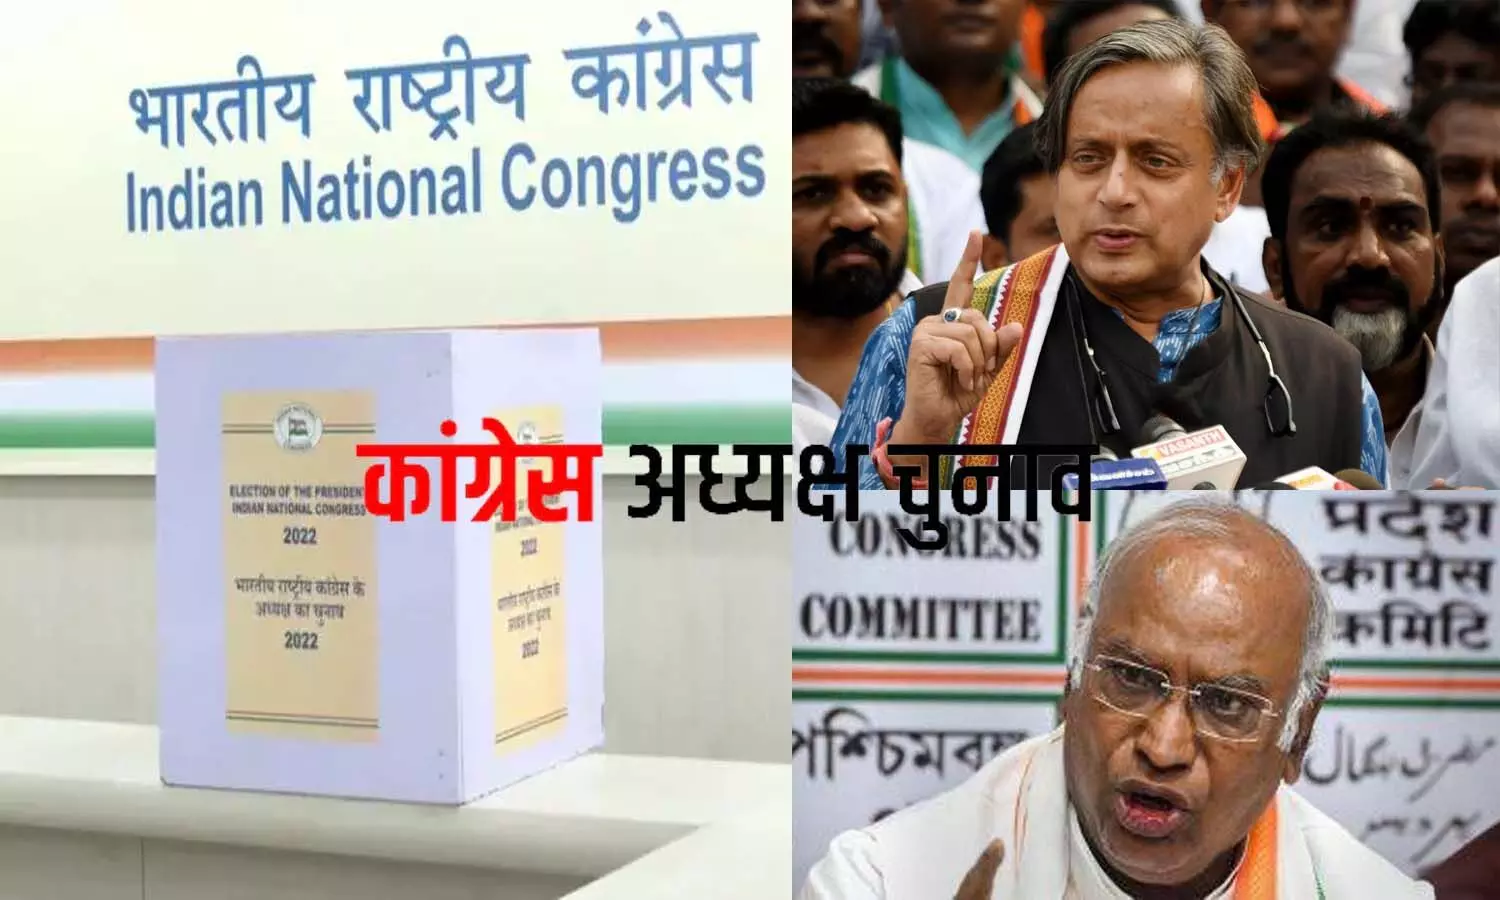 Voting for Congress President today- Mallikarjun Kharge and Shashi Tharoor contest